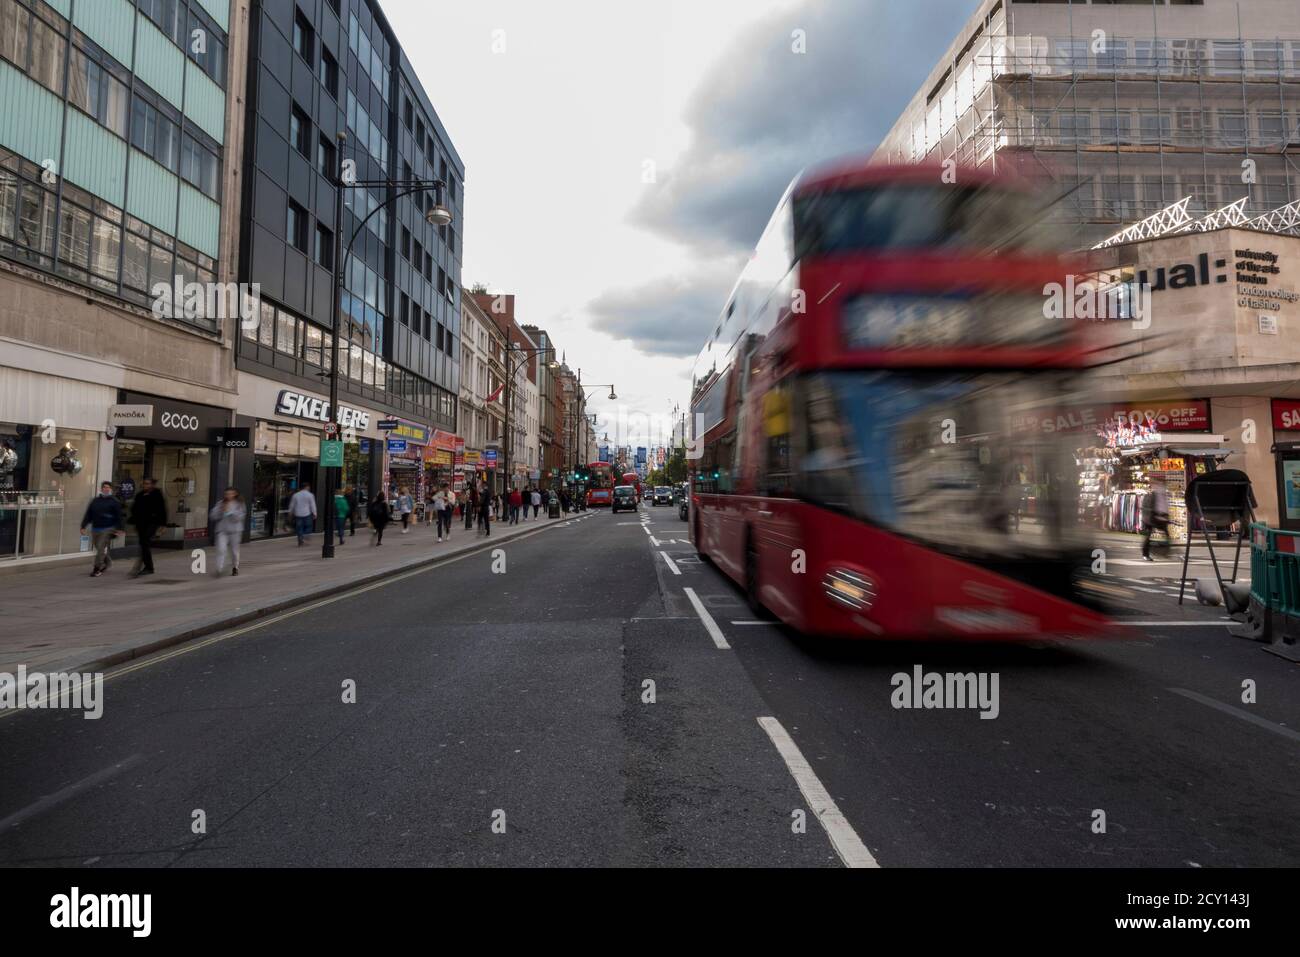 London, UK.  1 October 2020.  Traffic passes along Oxford Street, traditionally the busiest shopping street in the country, but as a result of the coronavirus pandemic, footfall has declined considerably.  Shoppers are preferring to shop online as people work from home.  Credit: Stephen Chung / Alamy Live News Stock Photo